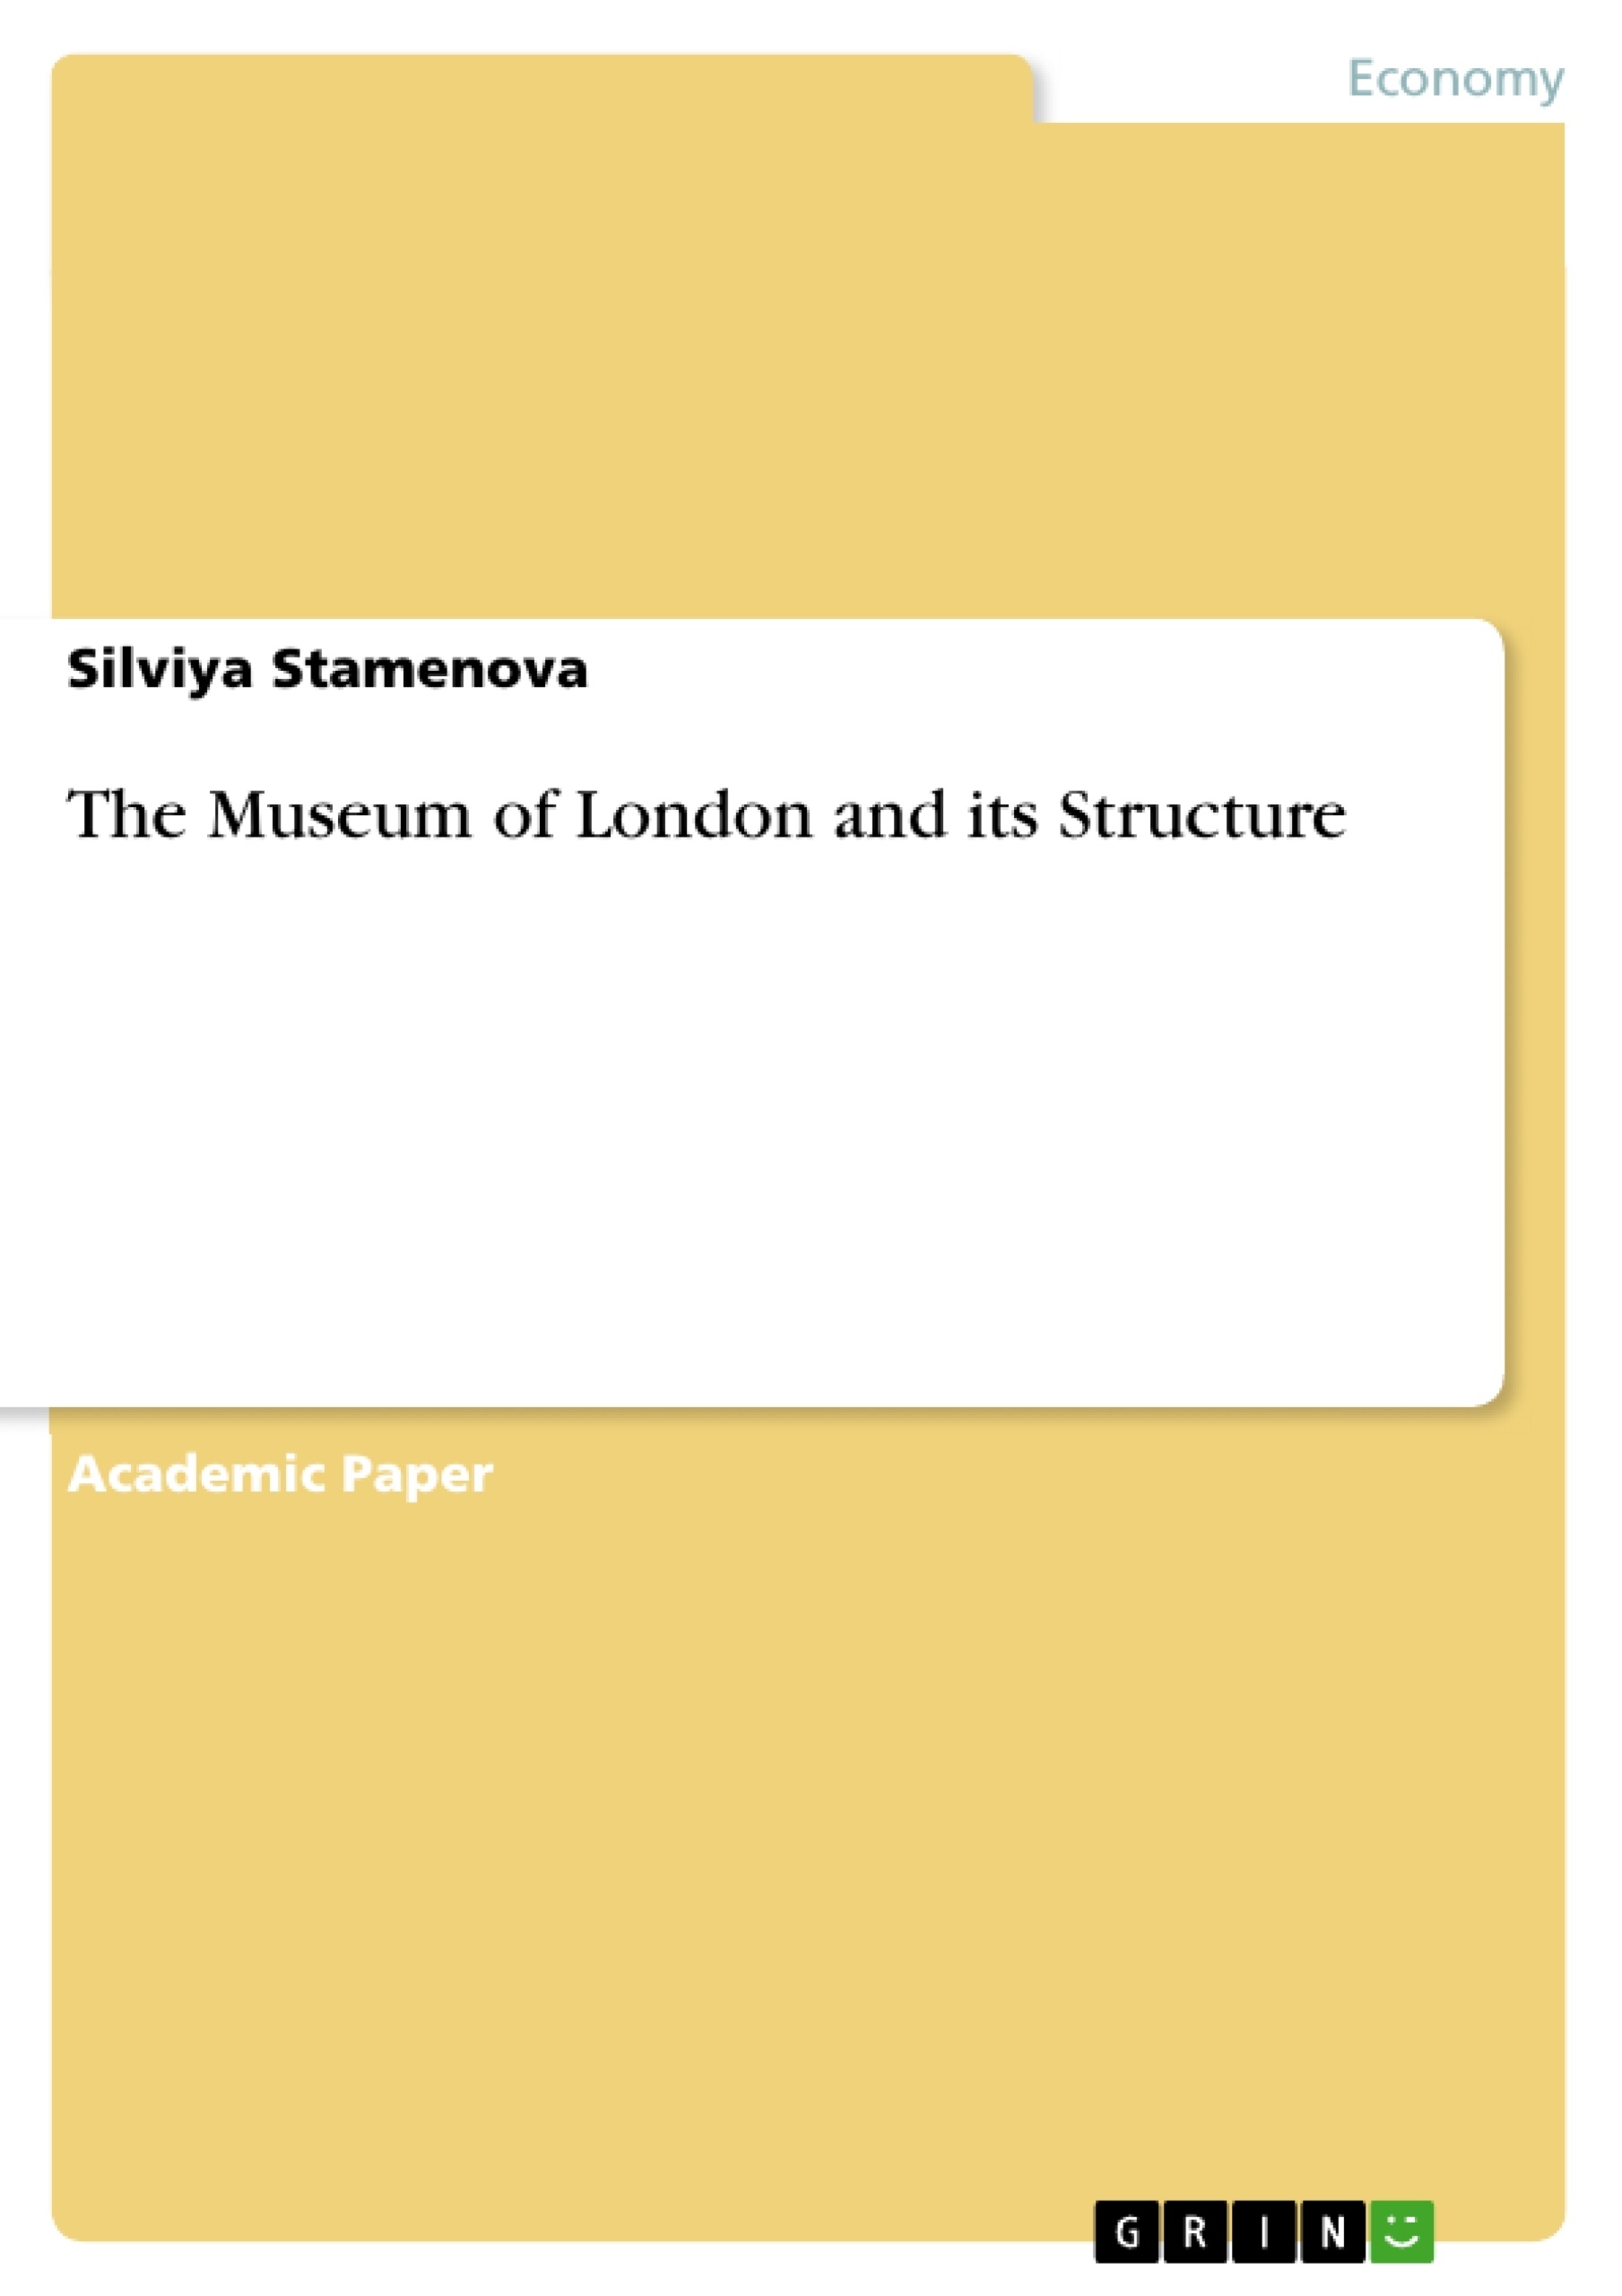 Titre: The Museum of London and its Structure